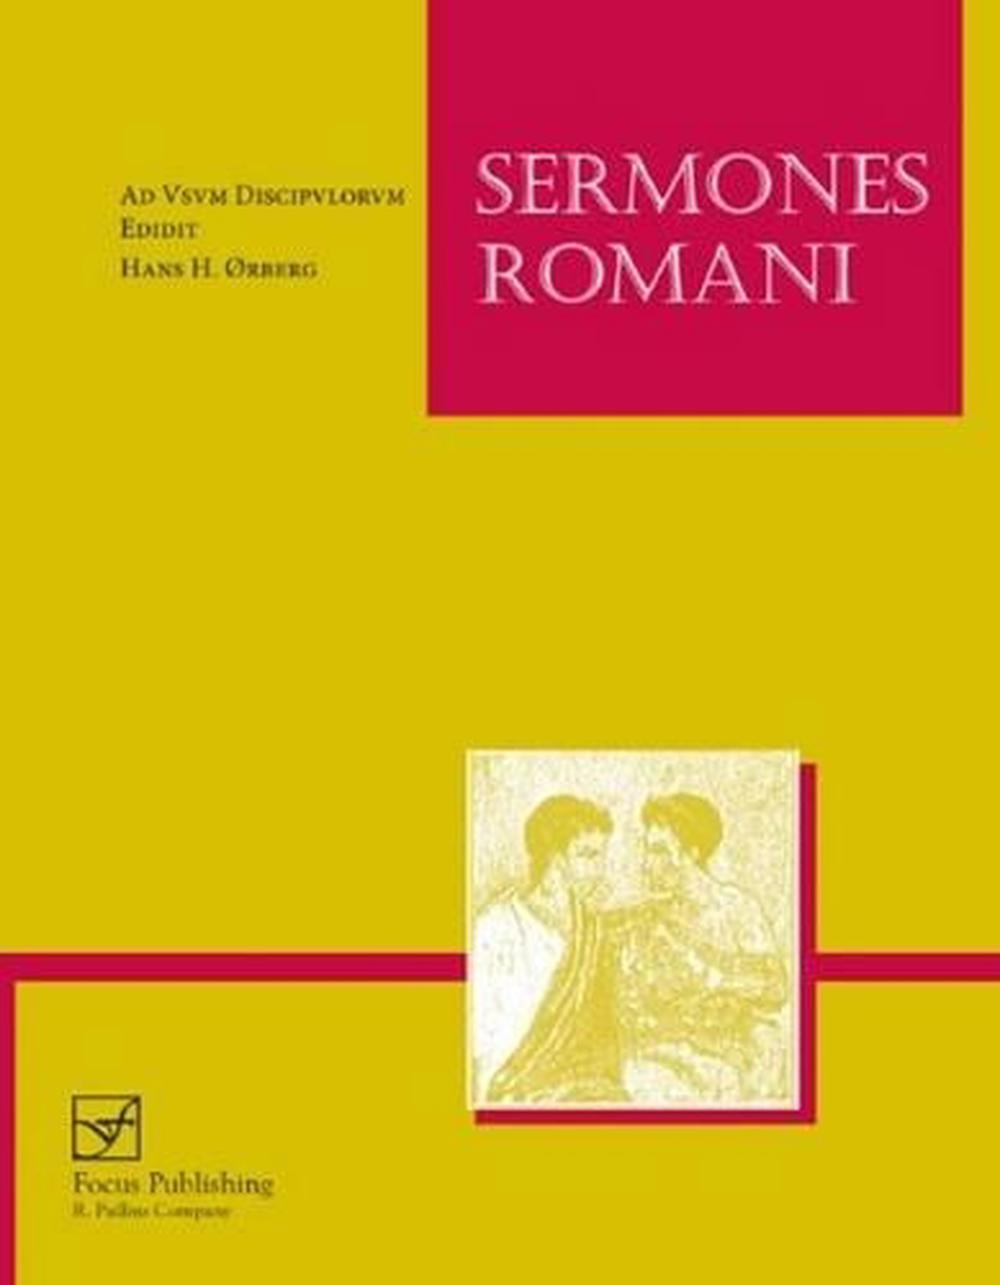 What book should one start with, with the Hans Ørberg learning Latin  series? : r/latin